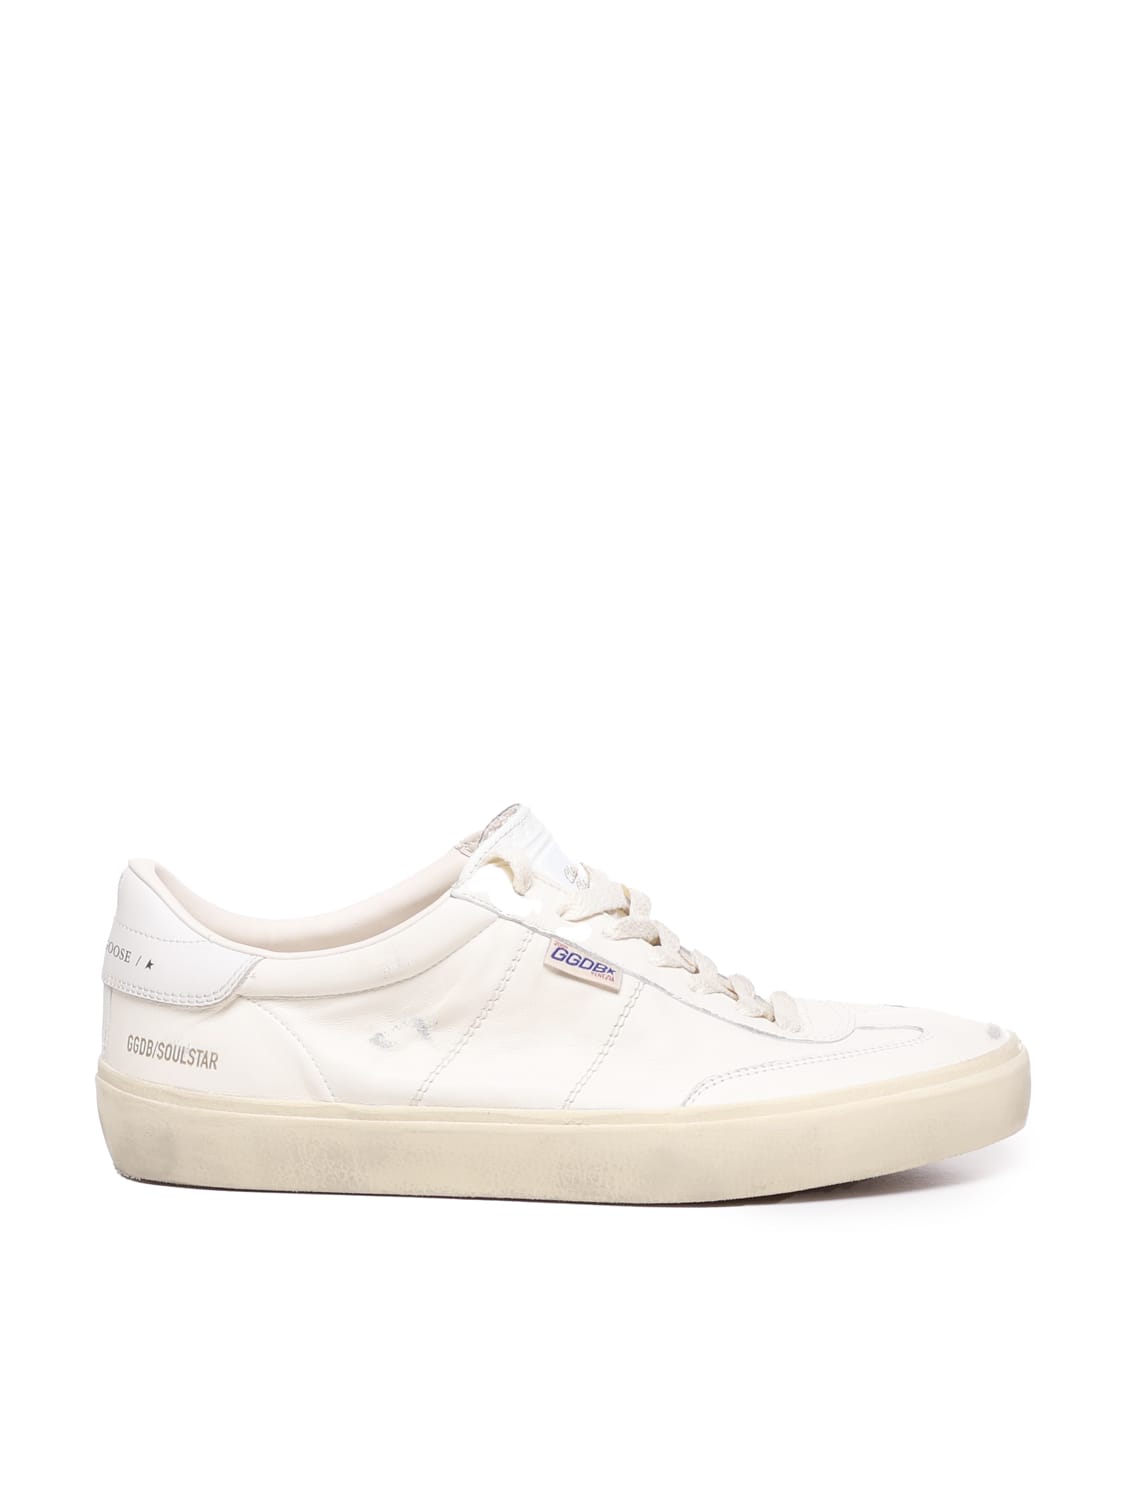 Golden Goose Soul Star Trainers In White/milk